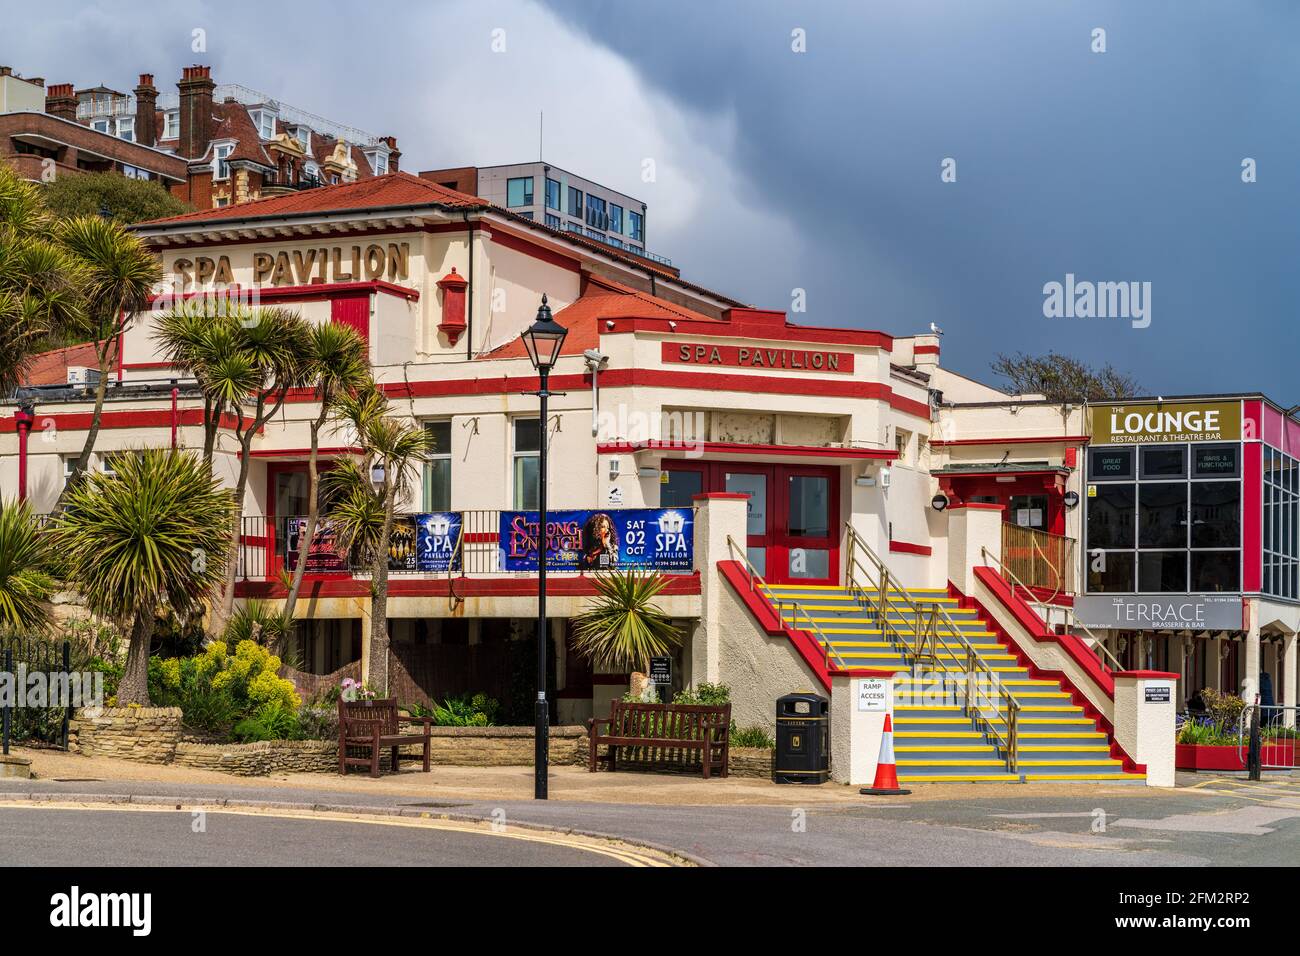 Spa Pavilion Felixstowe - the Felixstowe Spa Pavilion is a multi-purpose venue with a theatre, cafe, restaurant and bar. Built 1909, revamped 1930s. Stock Photo